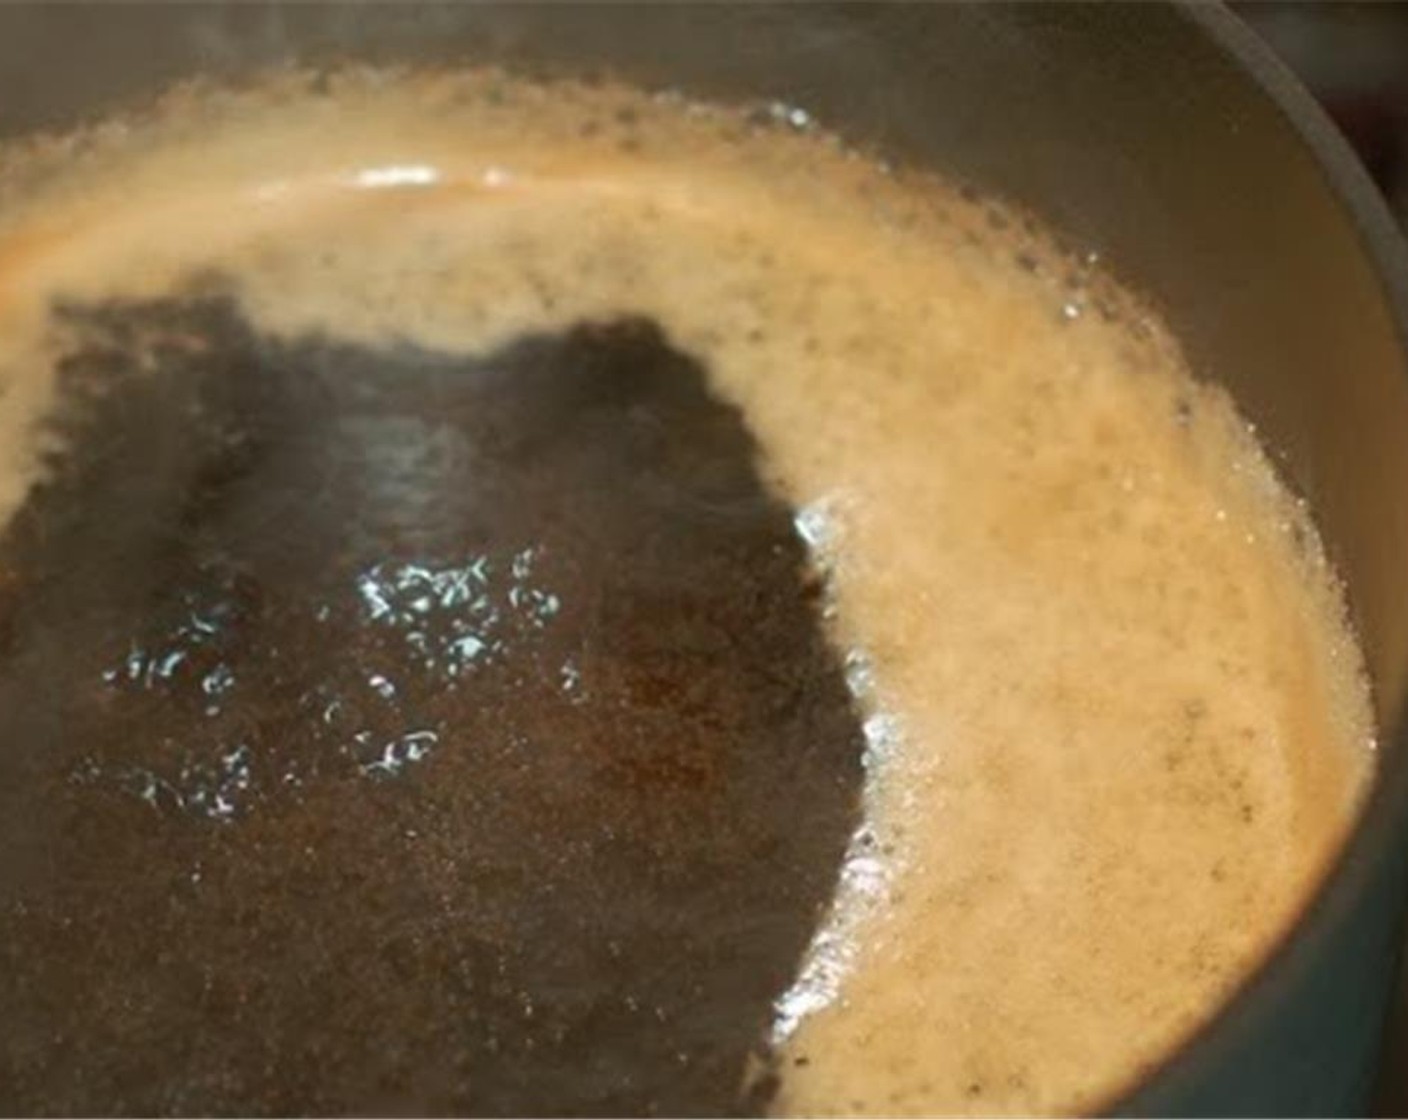 step 10 For frosting, place Guinness® Extra Stout Beer (1 cup) in a small saucepan and bring to a boil over medium heat. Boil for 15 minutes, until beer is reduced to about a 1/4 cup of liquid. Remove the pan from the heat.